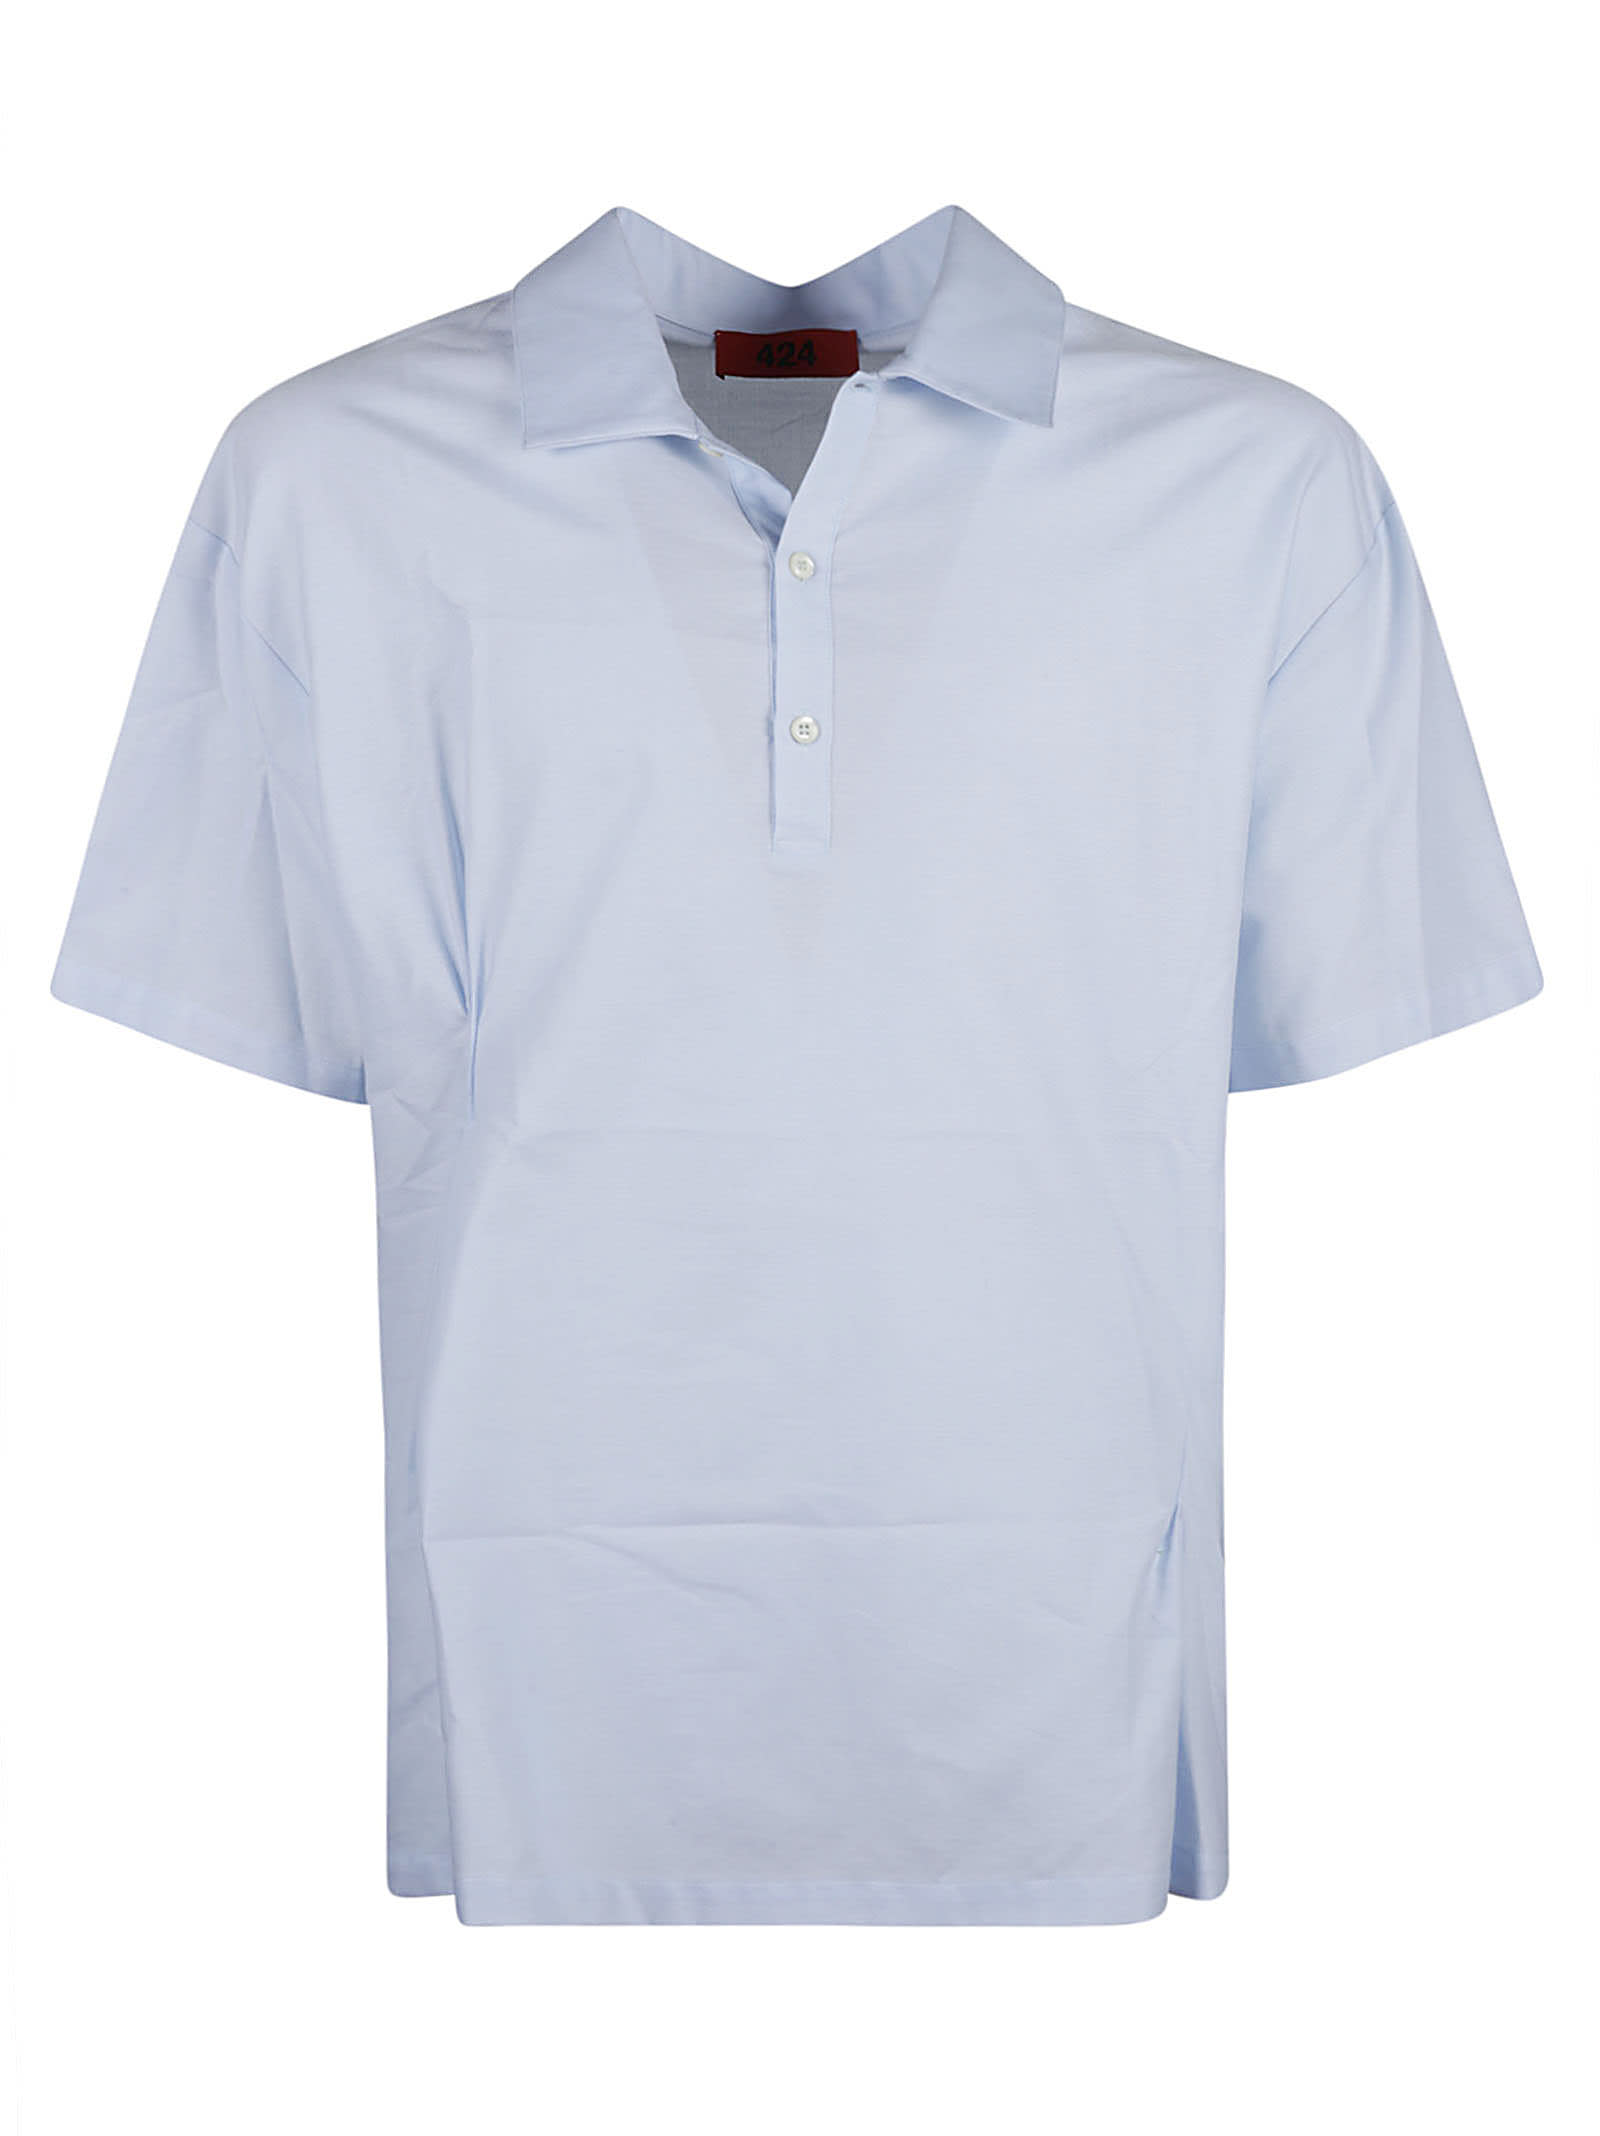 Two-buttoned Short-sleeved Shirt